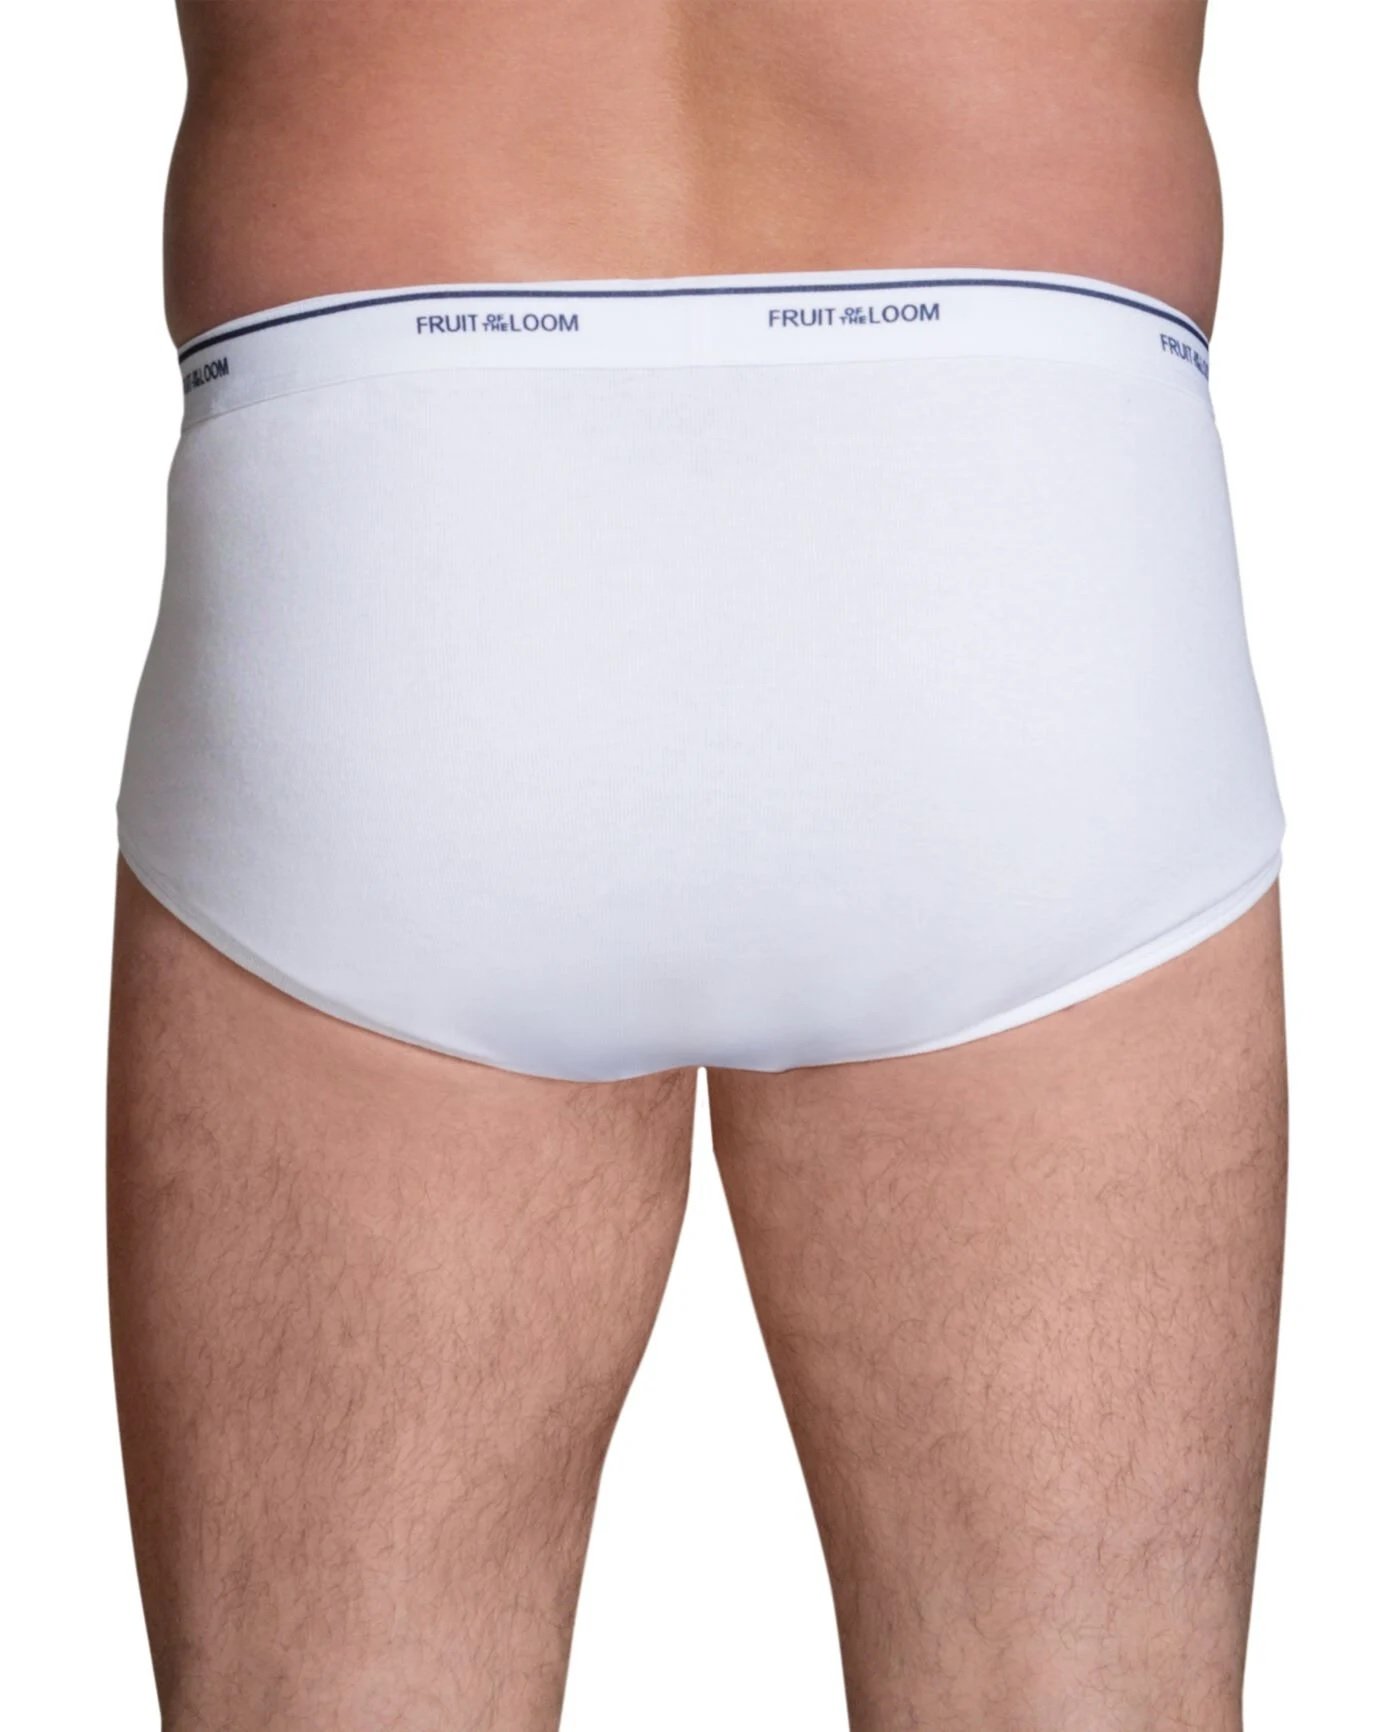 Fruit of the Loom Men's White Briefs, 9 Pack - image 4 of 6